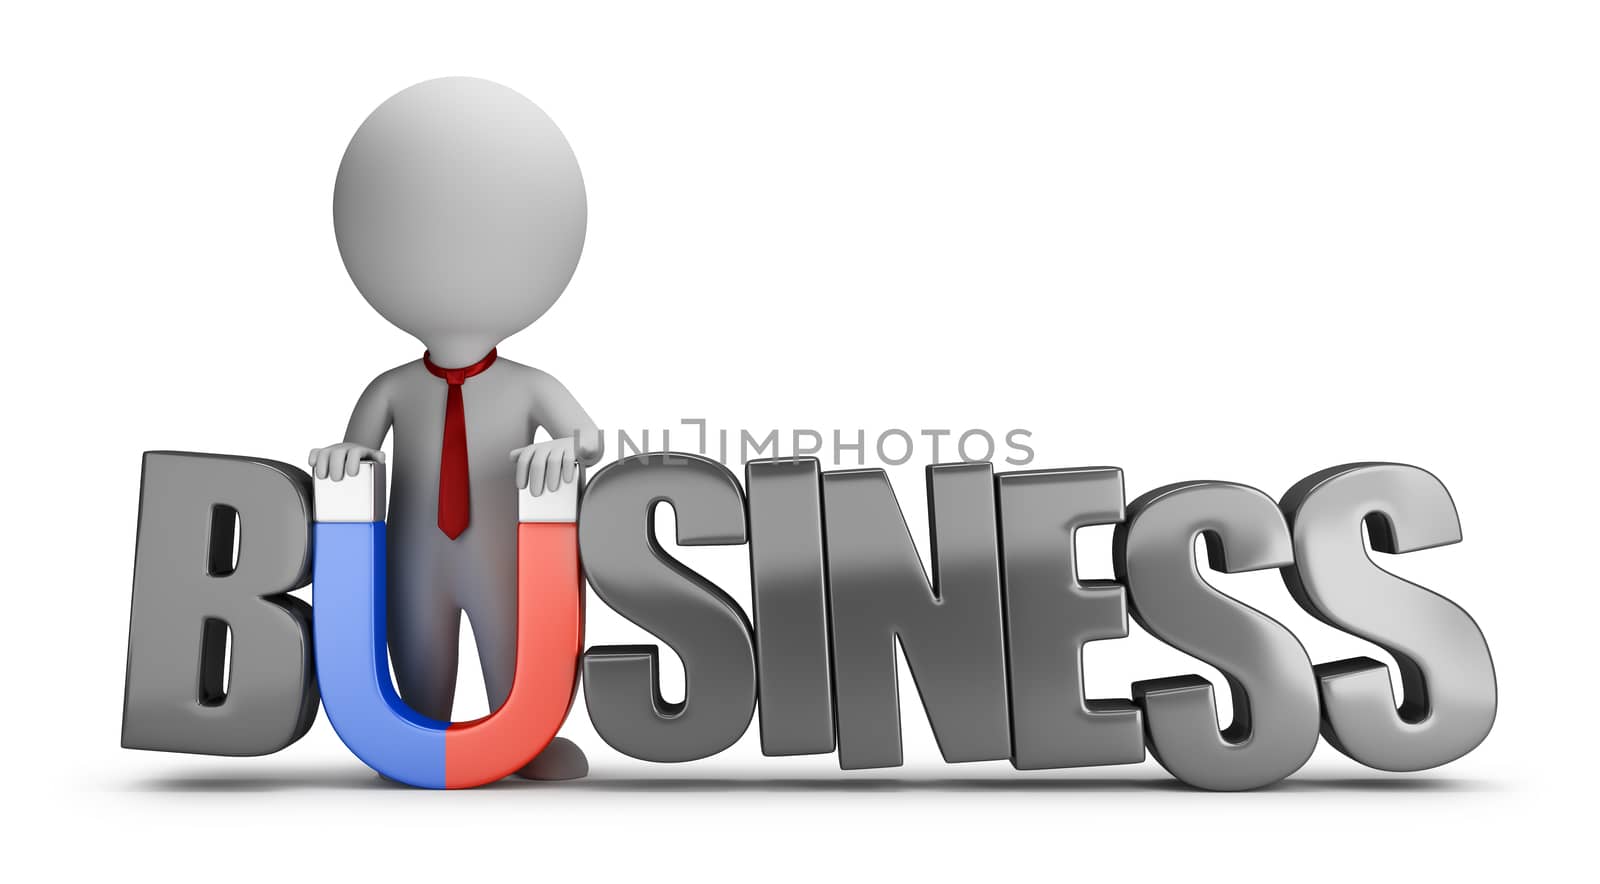 3d small person standing next to business and holding magnet. 3d image. White background.